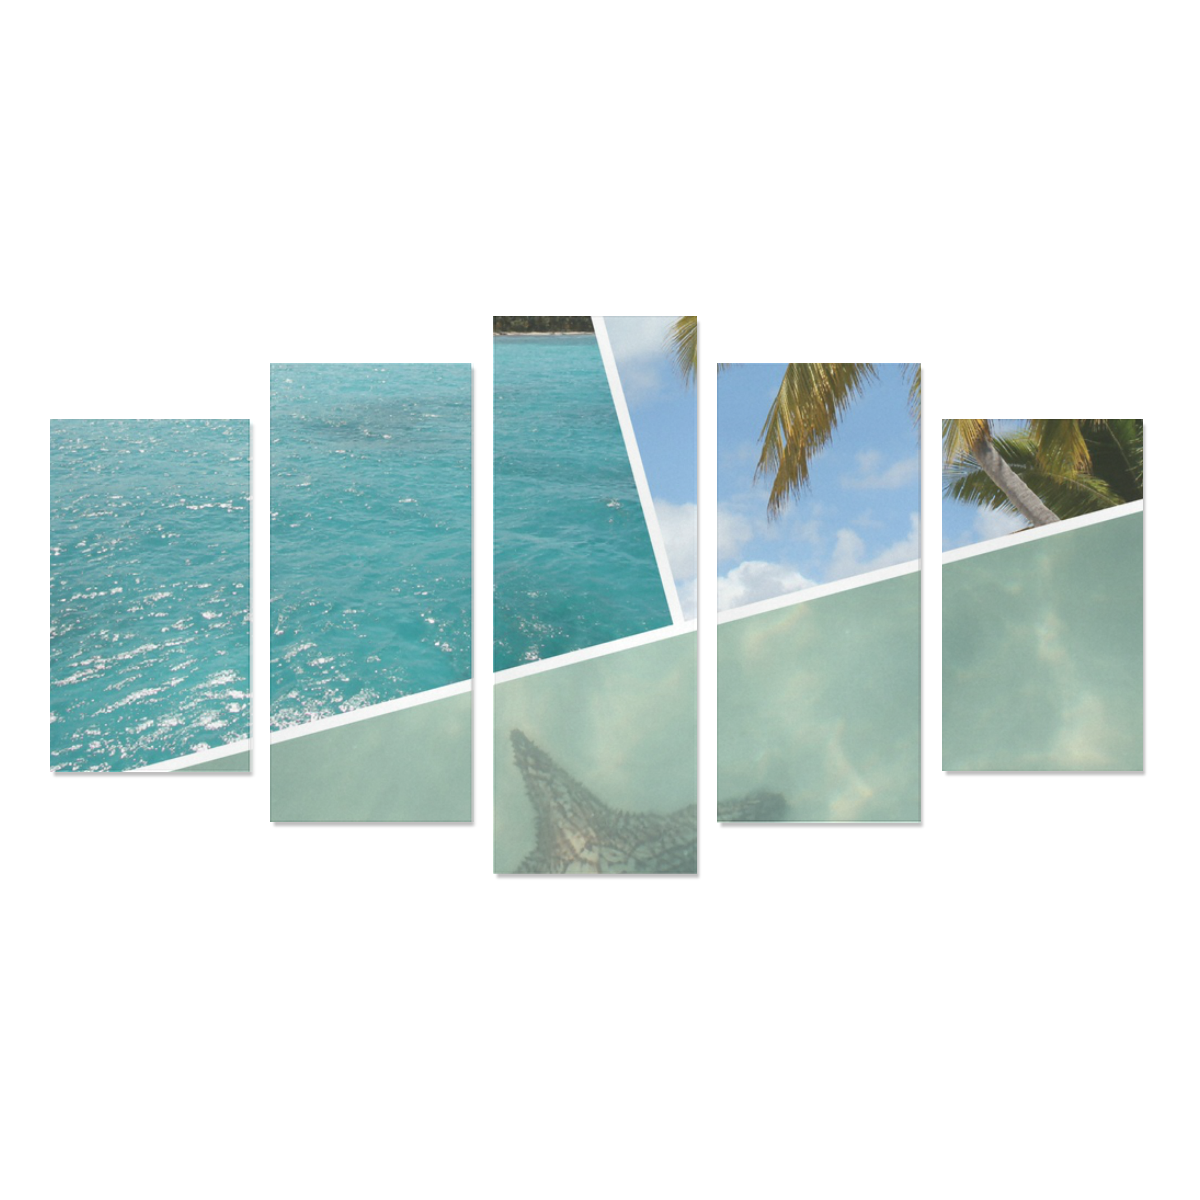 Caribbean Vacation Photo Collage Canvas Print Sets A (No Frame)